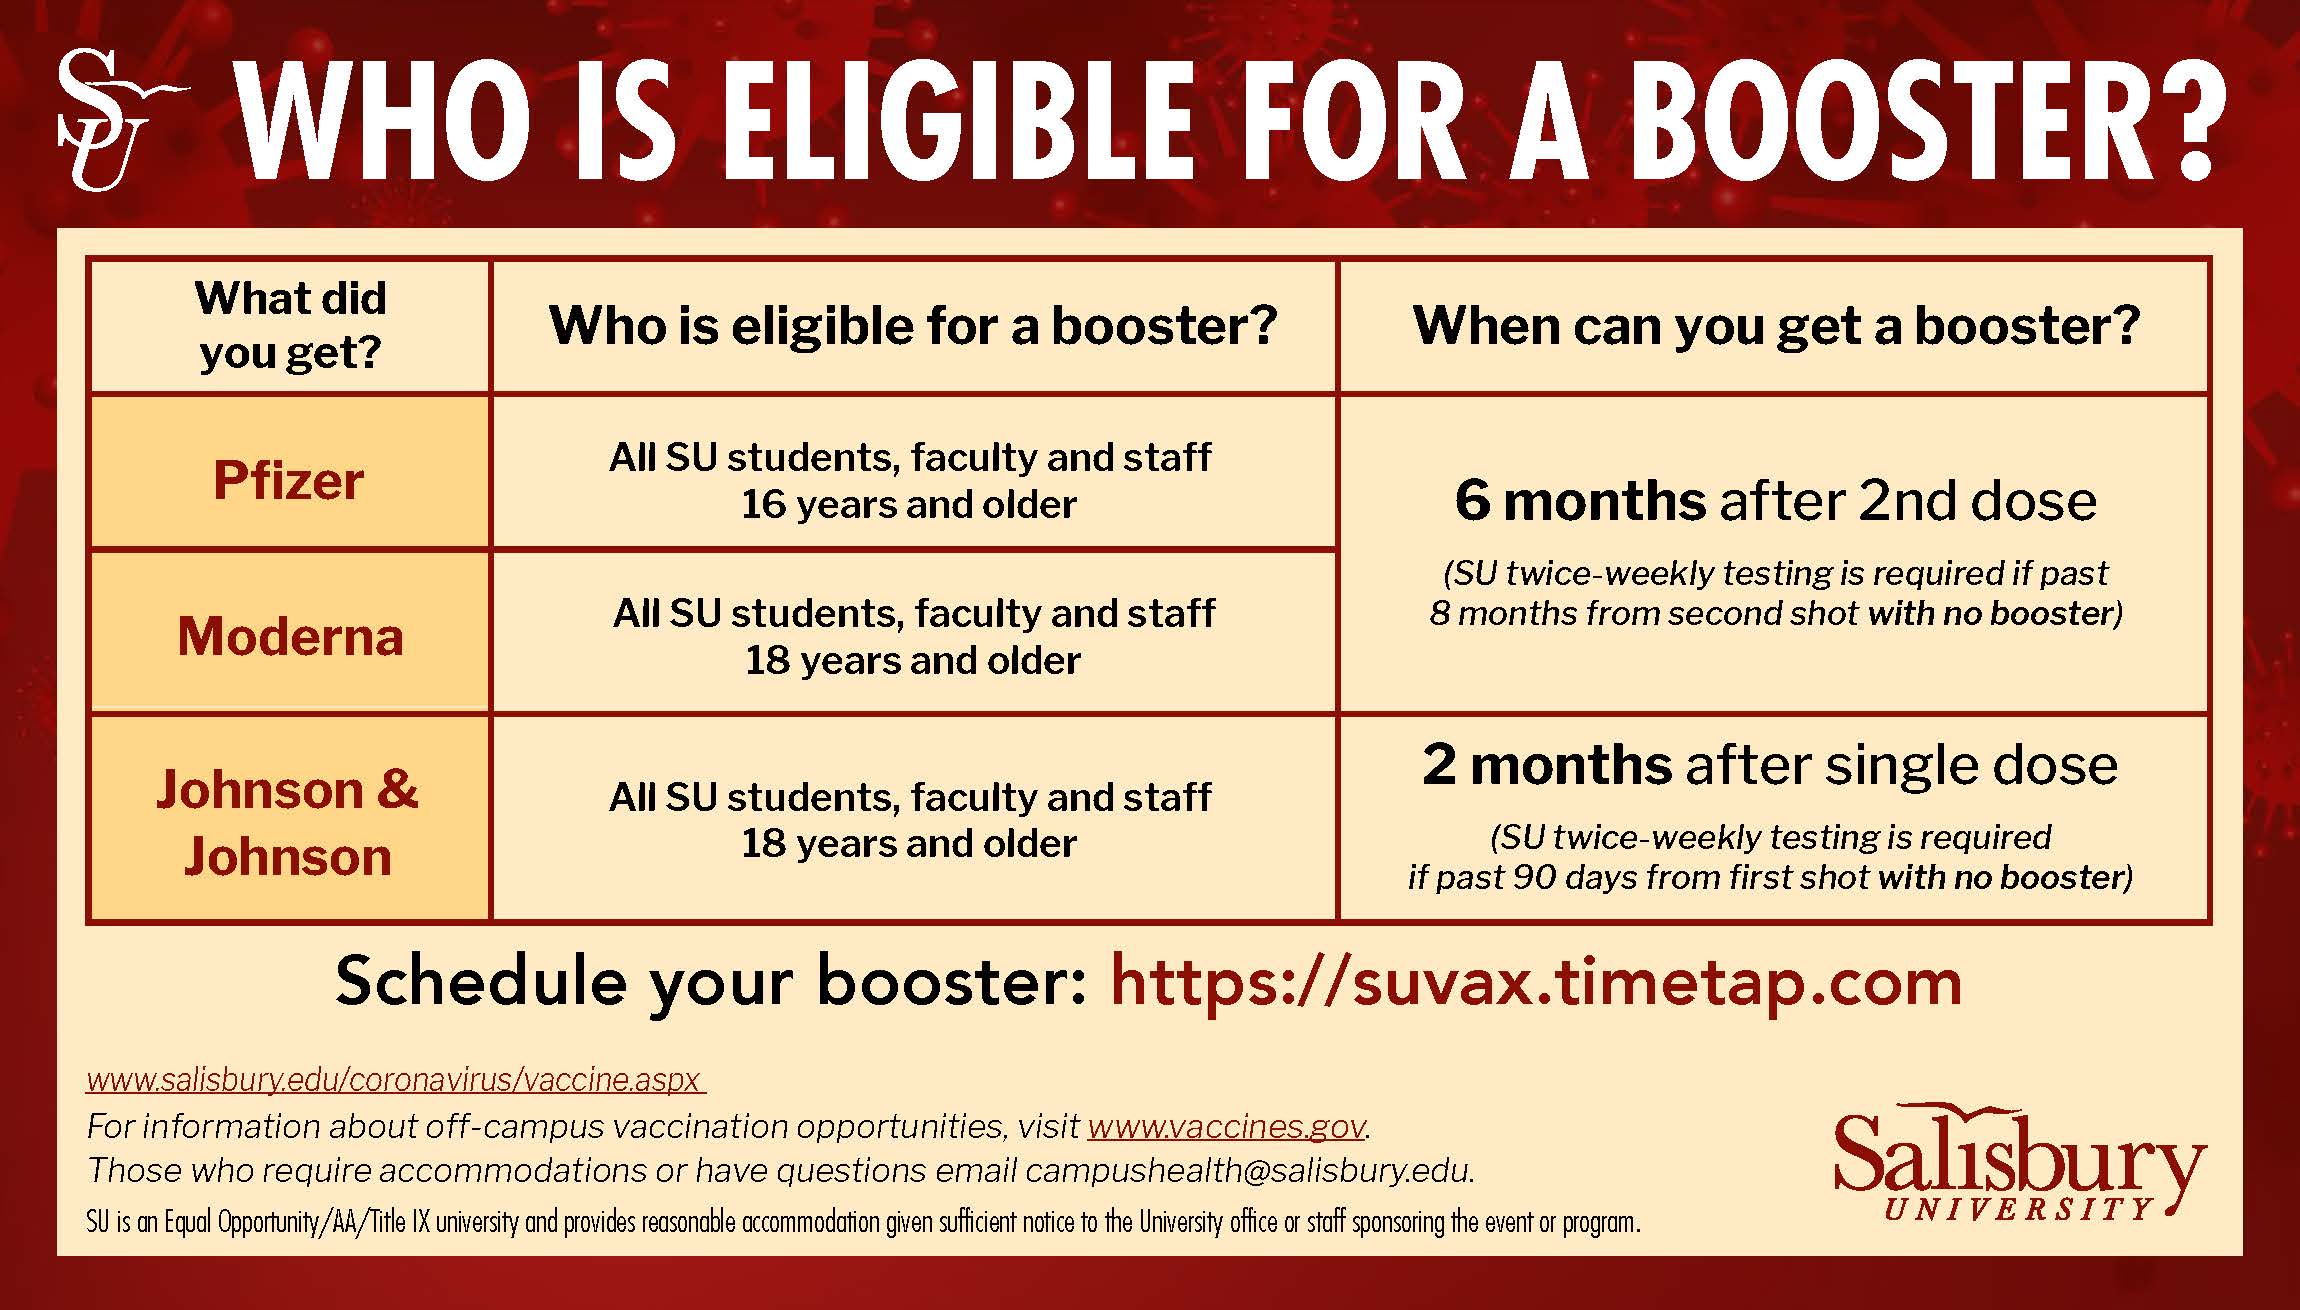 COVID-19 booster eligibility information